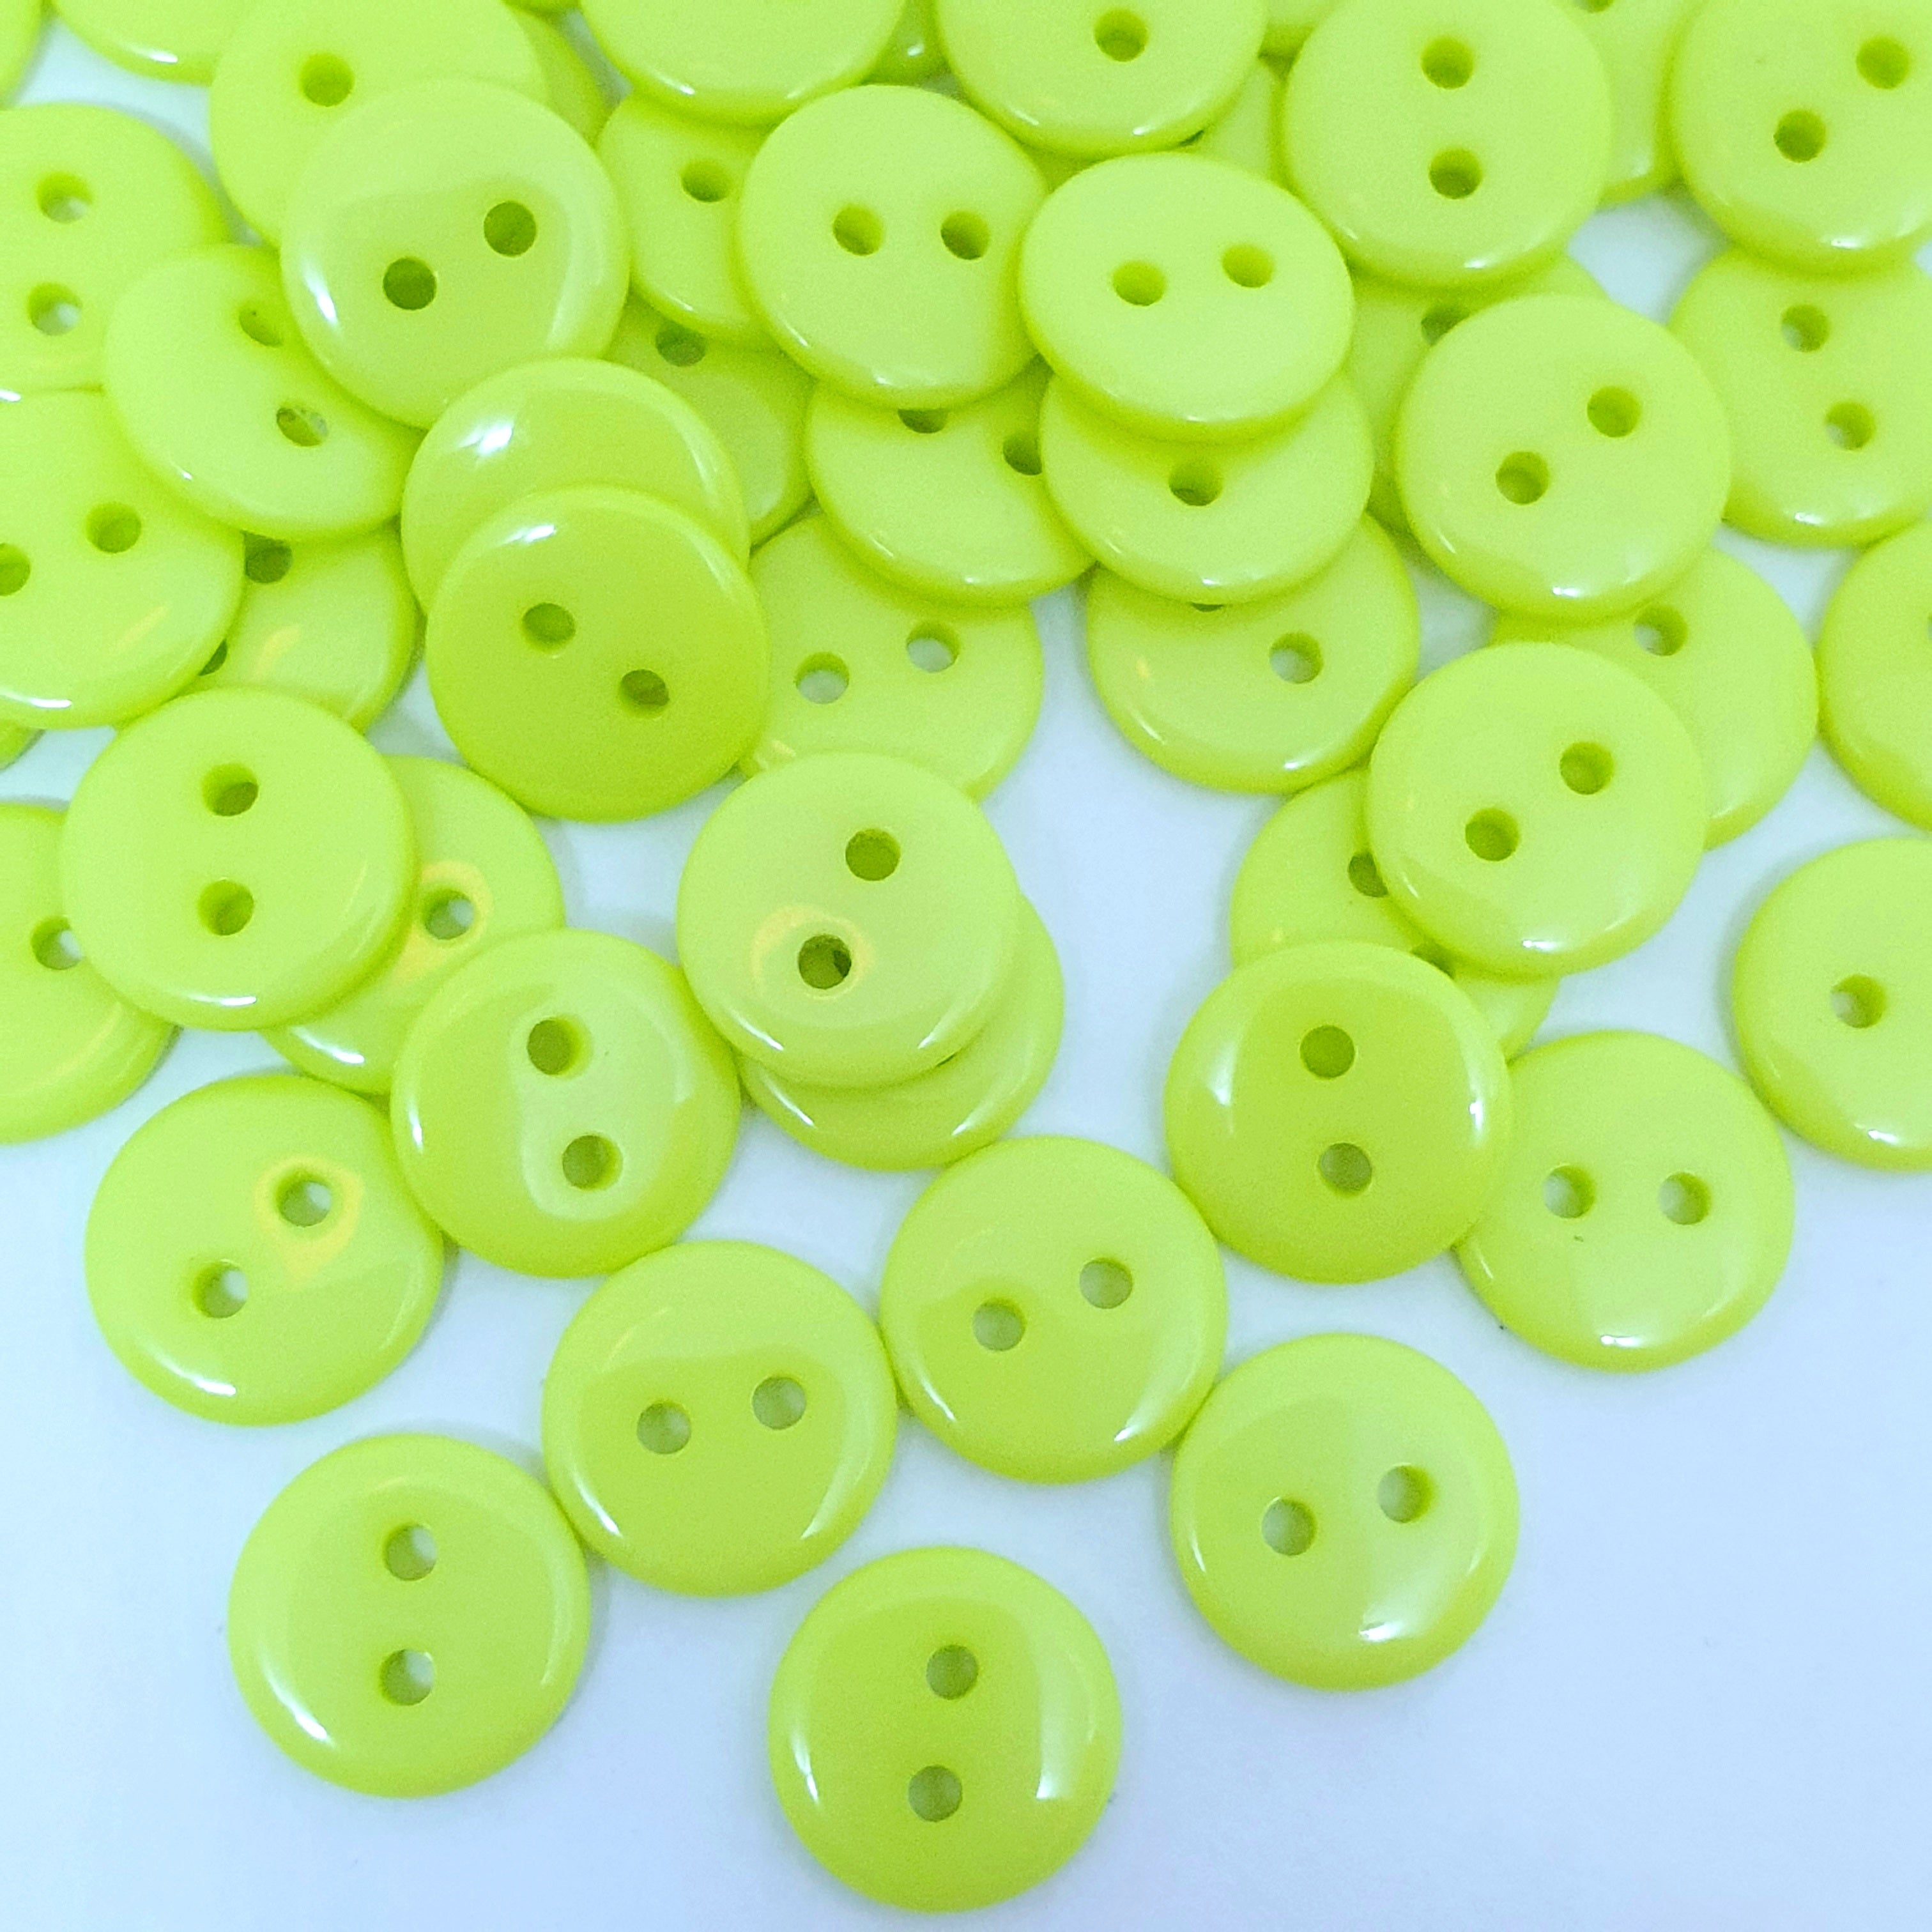 MajorCrafts 120pcs 9mm Yellow Green Small 2 Holes Round Resin Sewing Buttons B10